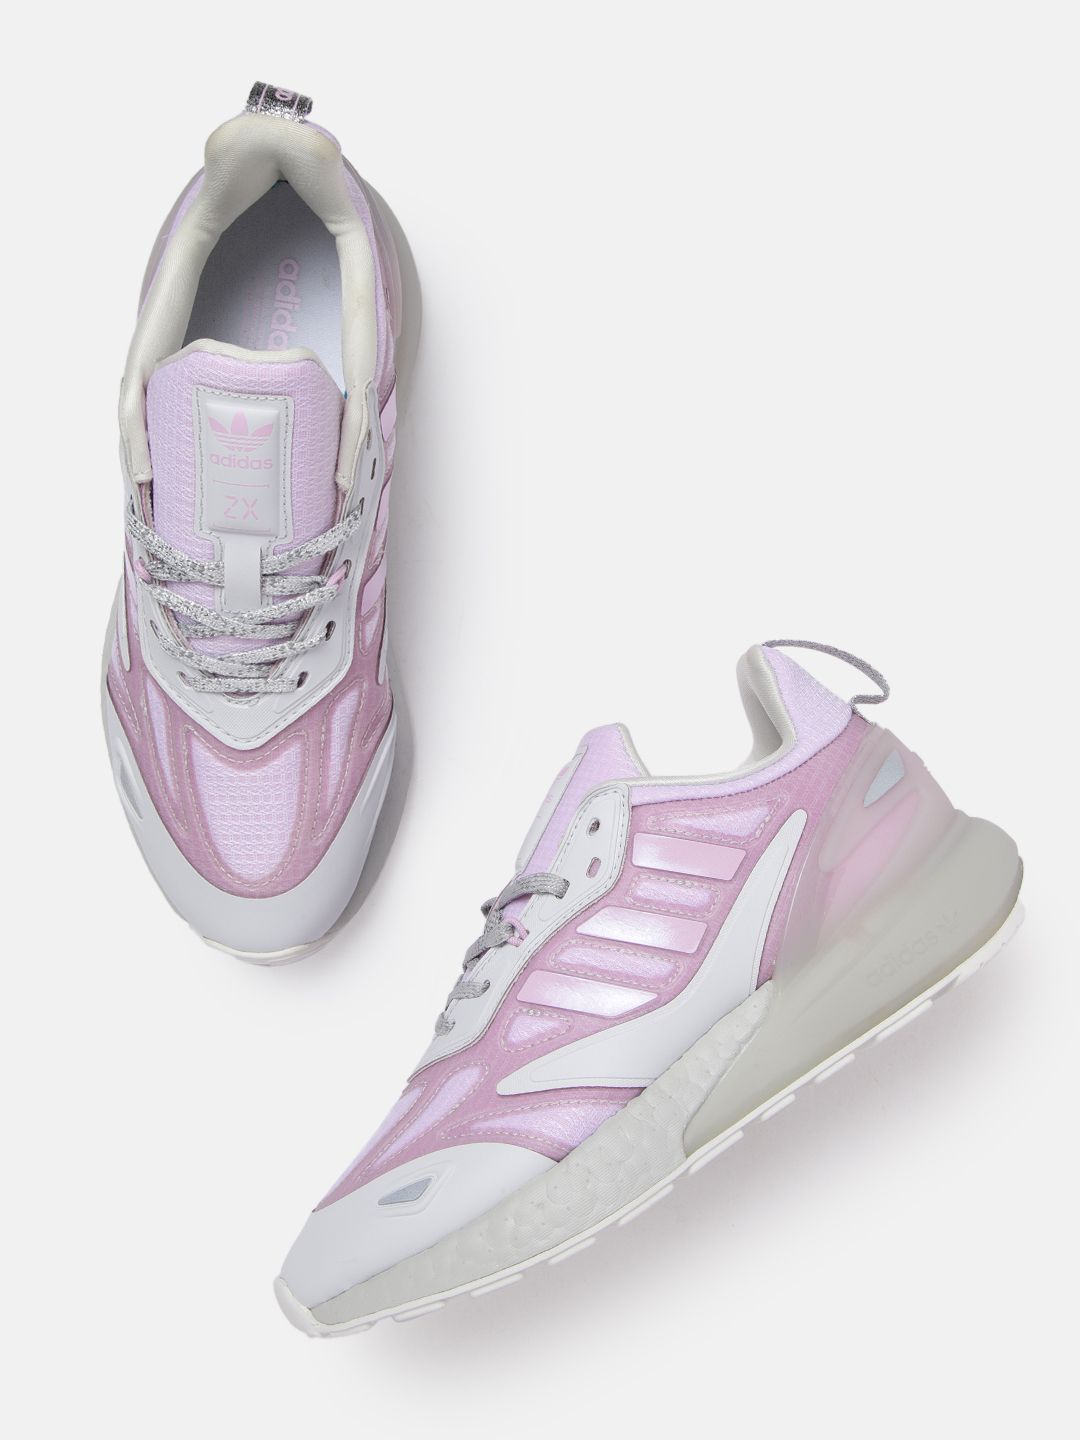 ADIDAS Originals Women Lilac & Grey Woven Design ZX 2K Boost 2.0 Sneakers Price in India